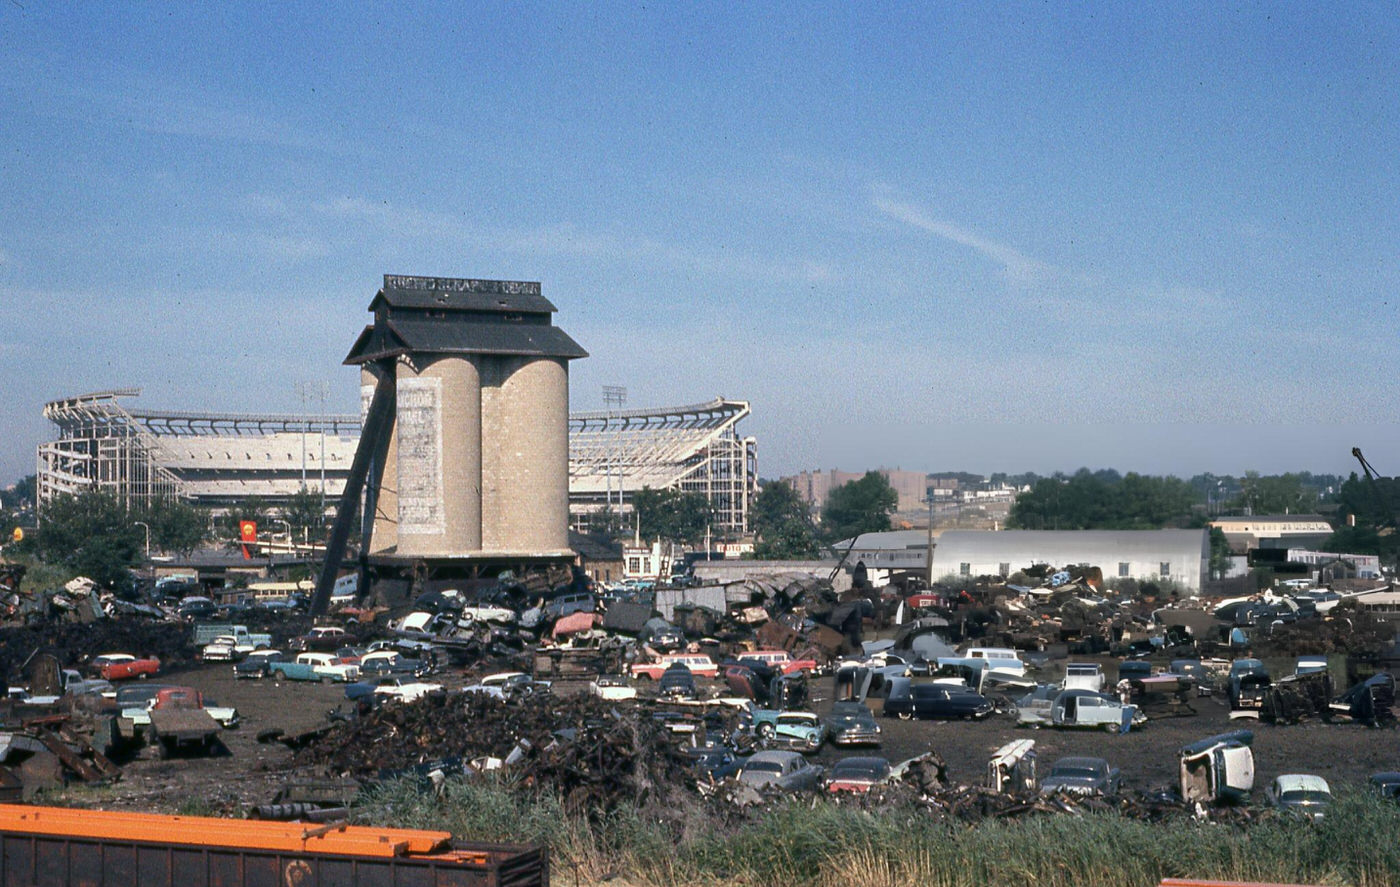 Junkyard On Willets Point Boulevard In Queens' Corona Neighborhood With The Municipal Stadium Under Construction In The Background, 1963.